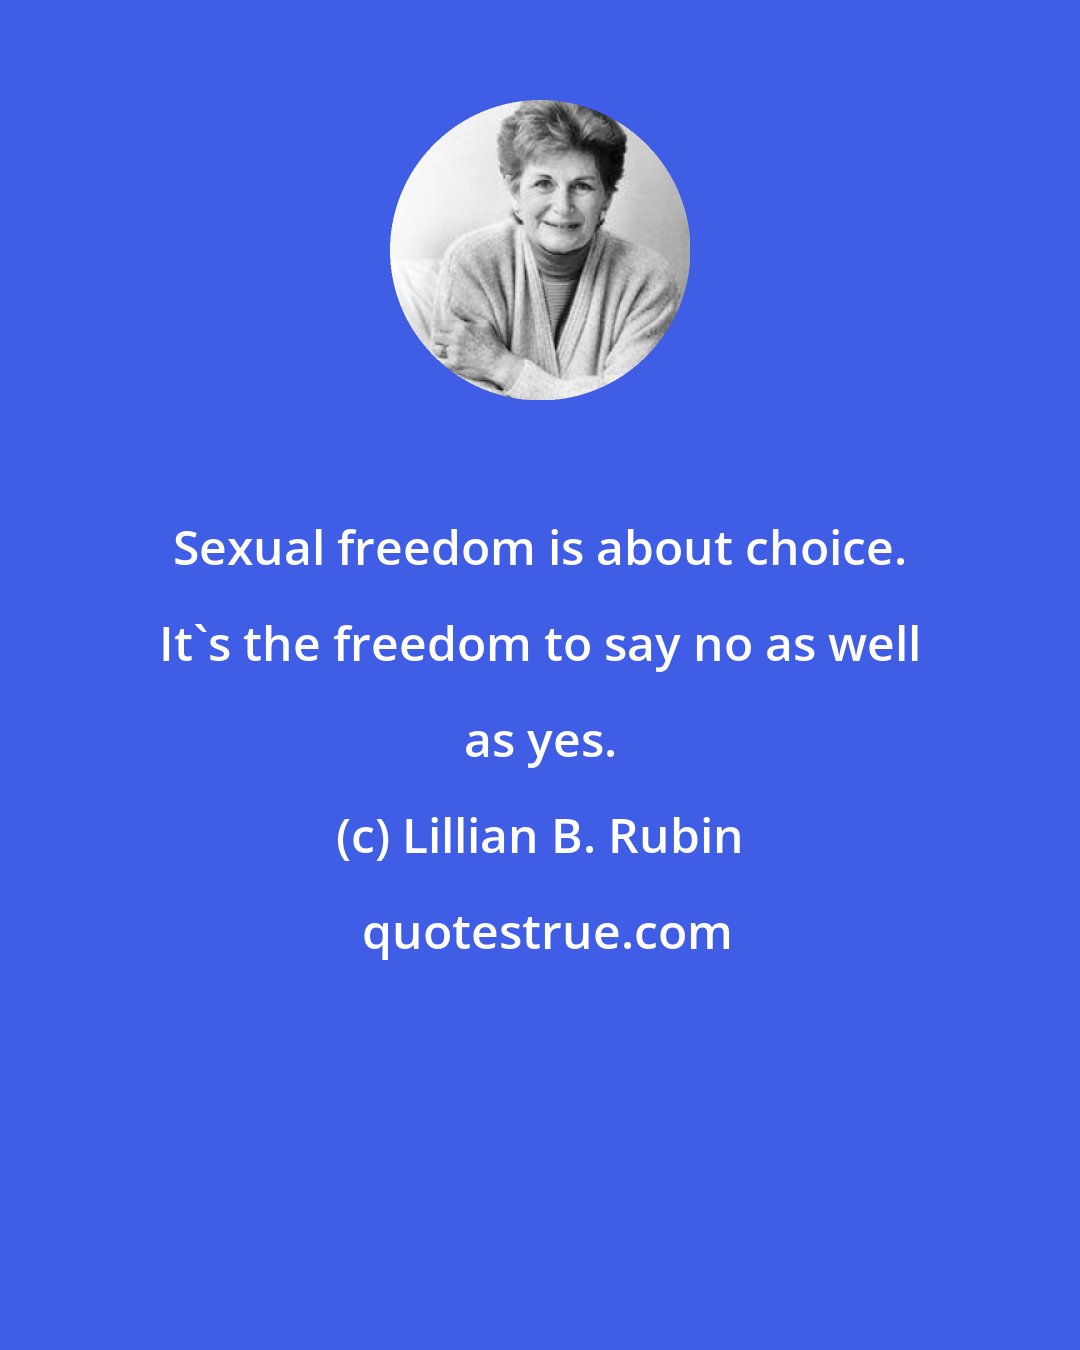 Lillian B. Rubin: Sexual freedom is about choice. It's the freedom to say no as well as yes.